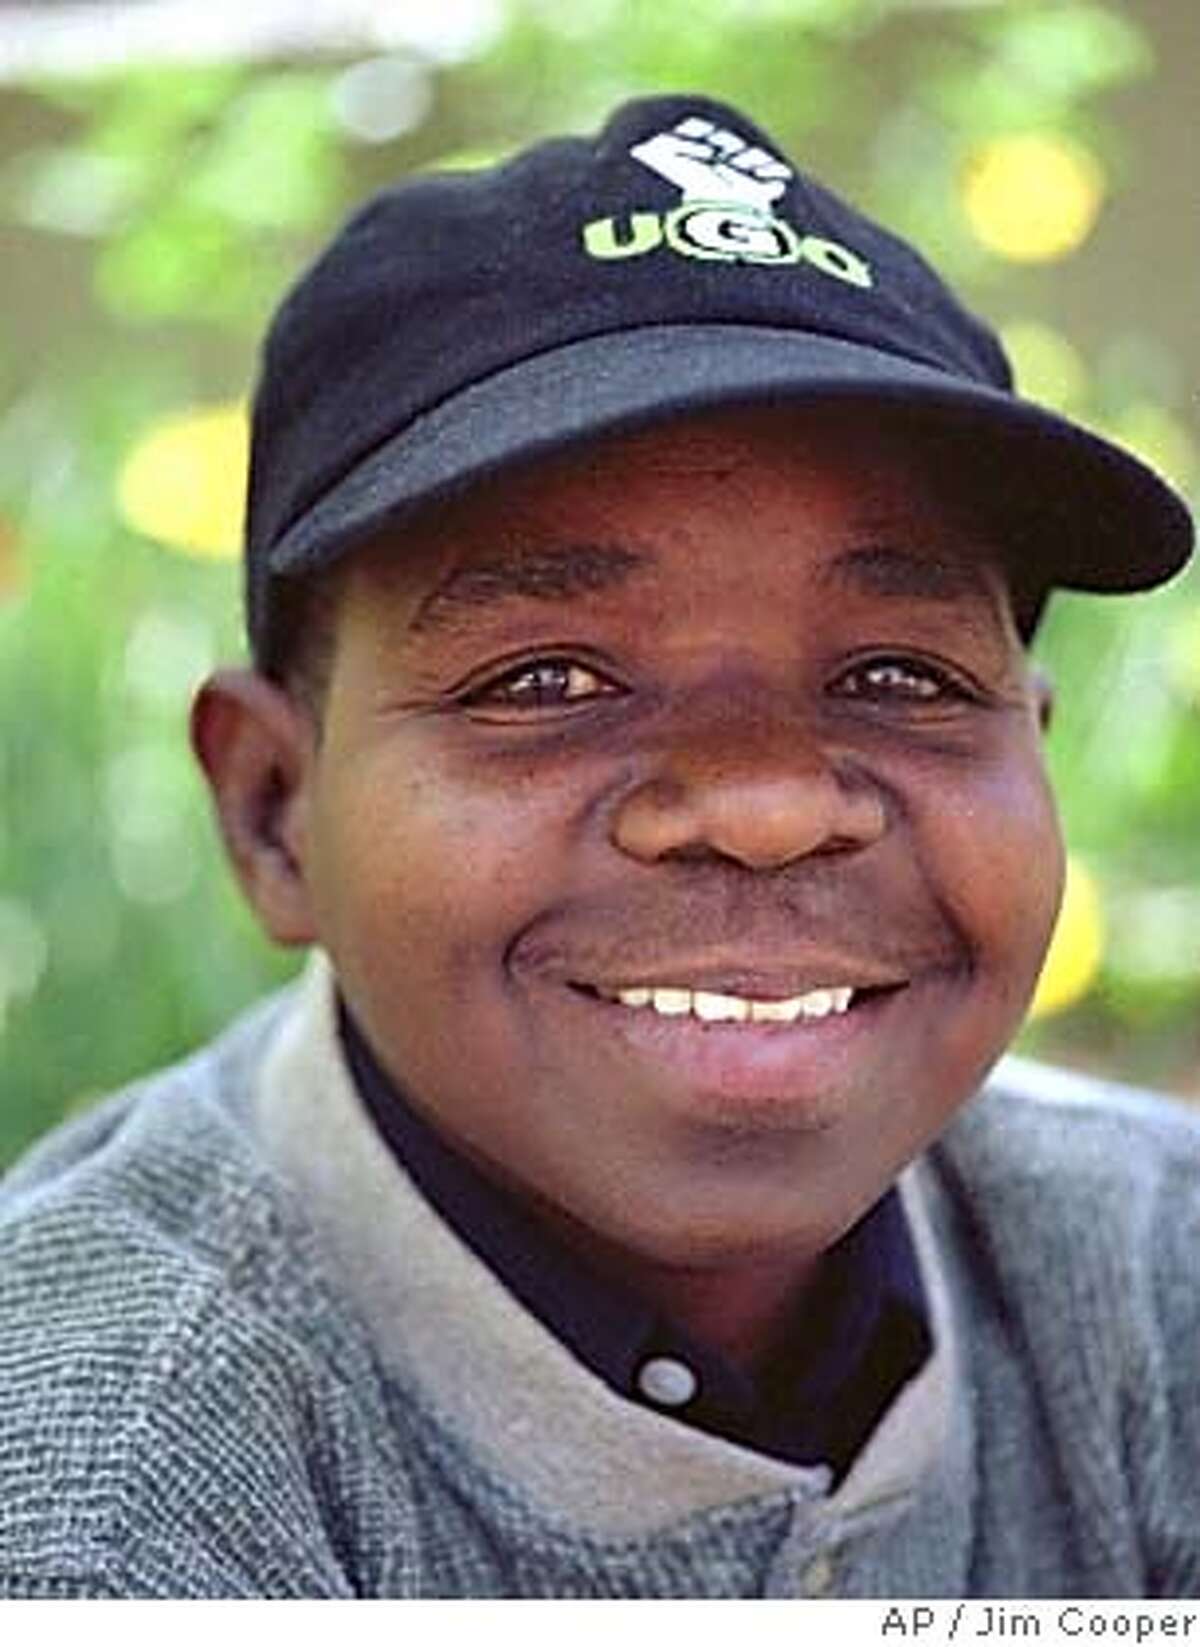 Gary Coleman poses in New York, April 30, 2001. The 33-year-old diminutive star of the '80s sitcom "Diff'rent Strokes," doesn't watch TV anymore. He doesn't have cable. He doesn't even like talking about his time on the tube; at the end of last year, he placed a moratorium on reporters' questions about the show. And he definitely will NOT, if asked, say "Whatchu talkin' 'bout?" (AP Photo/Jim Cooper)